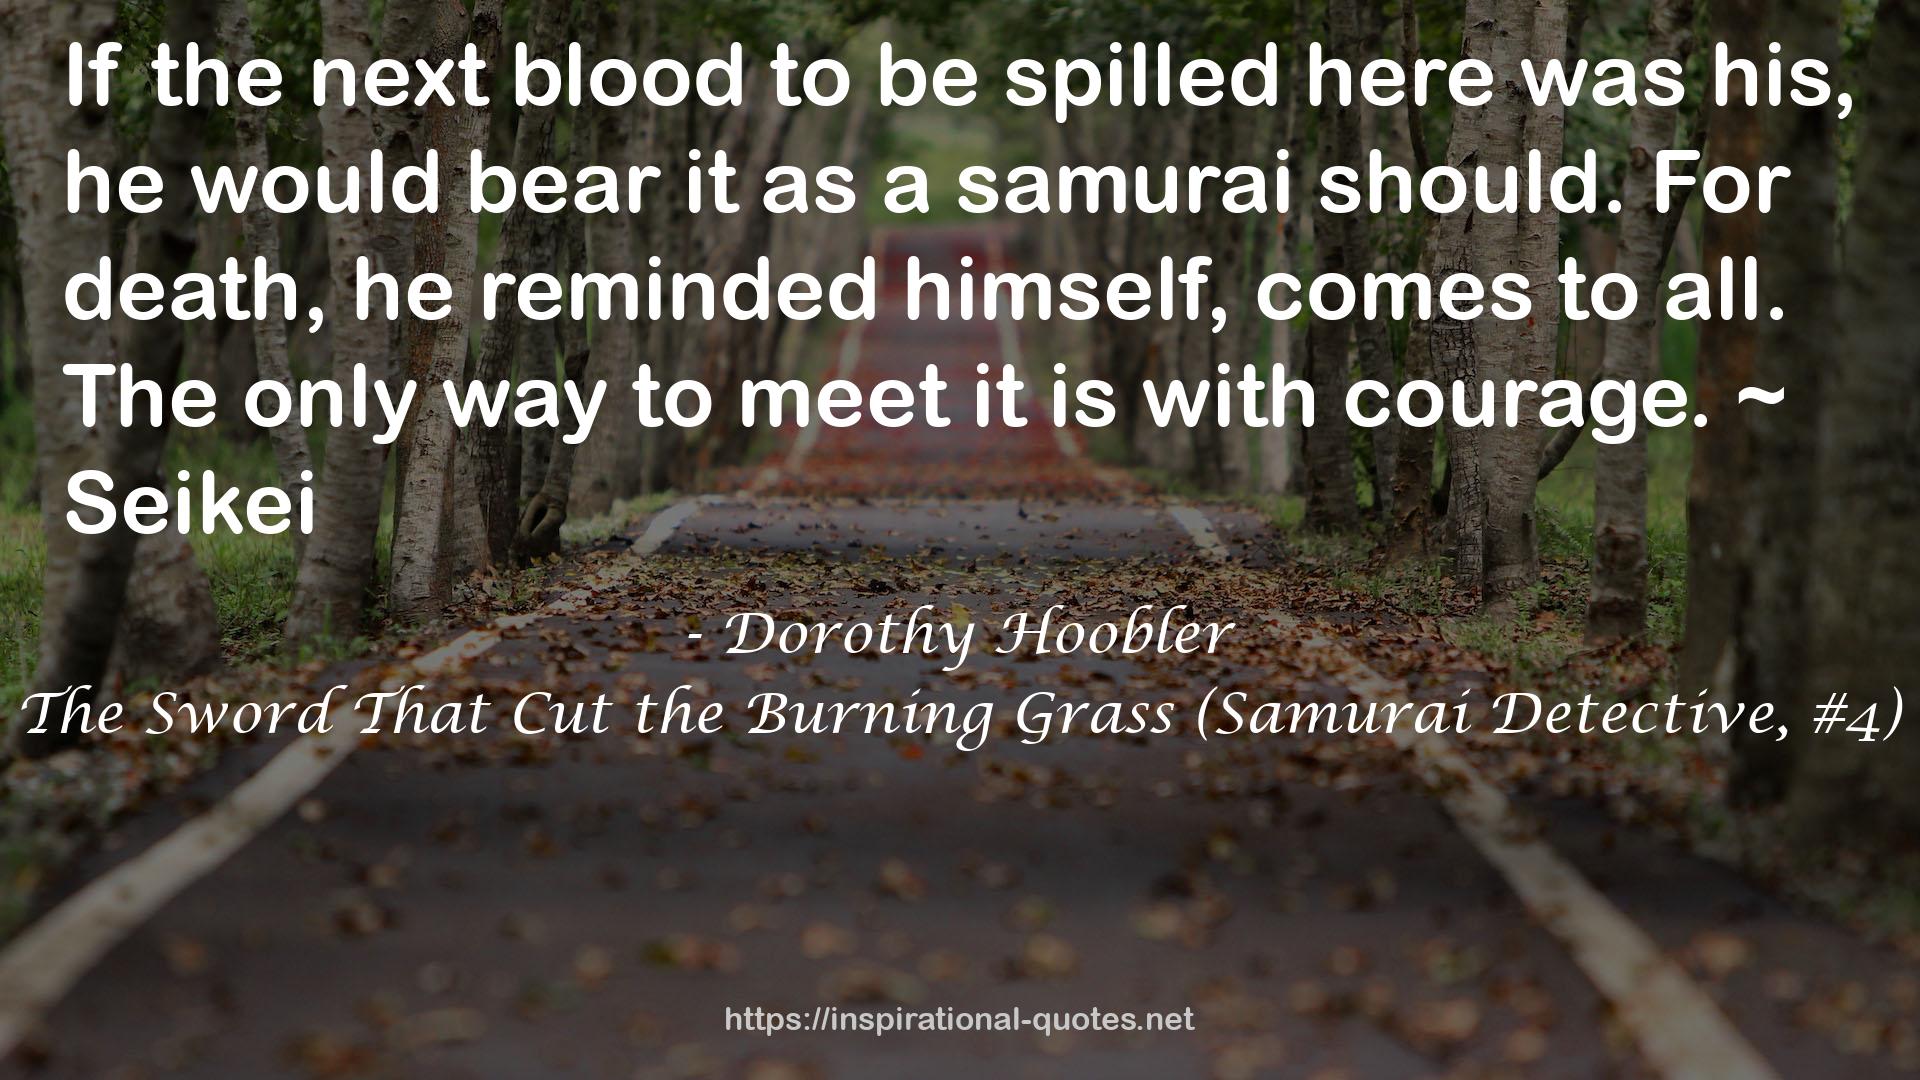 The Sword That Cut the Burning Grass (Samurai Detective, #4) QUOTES